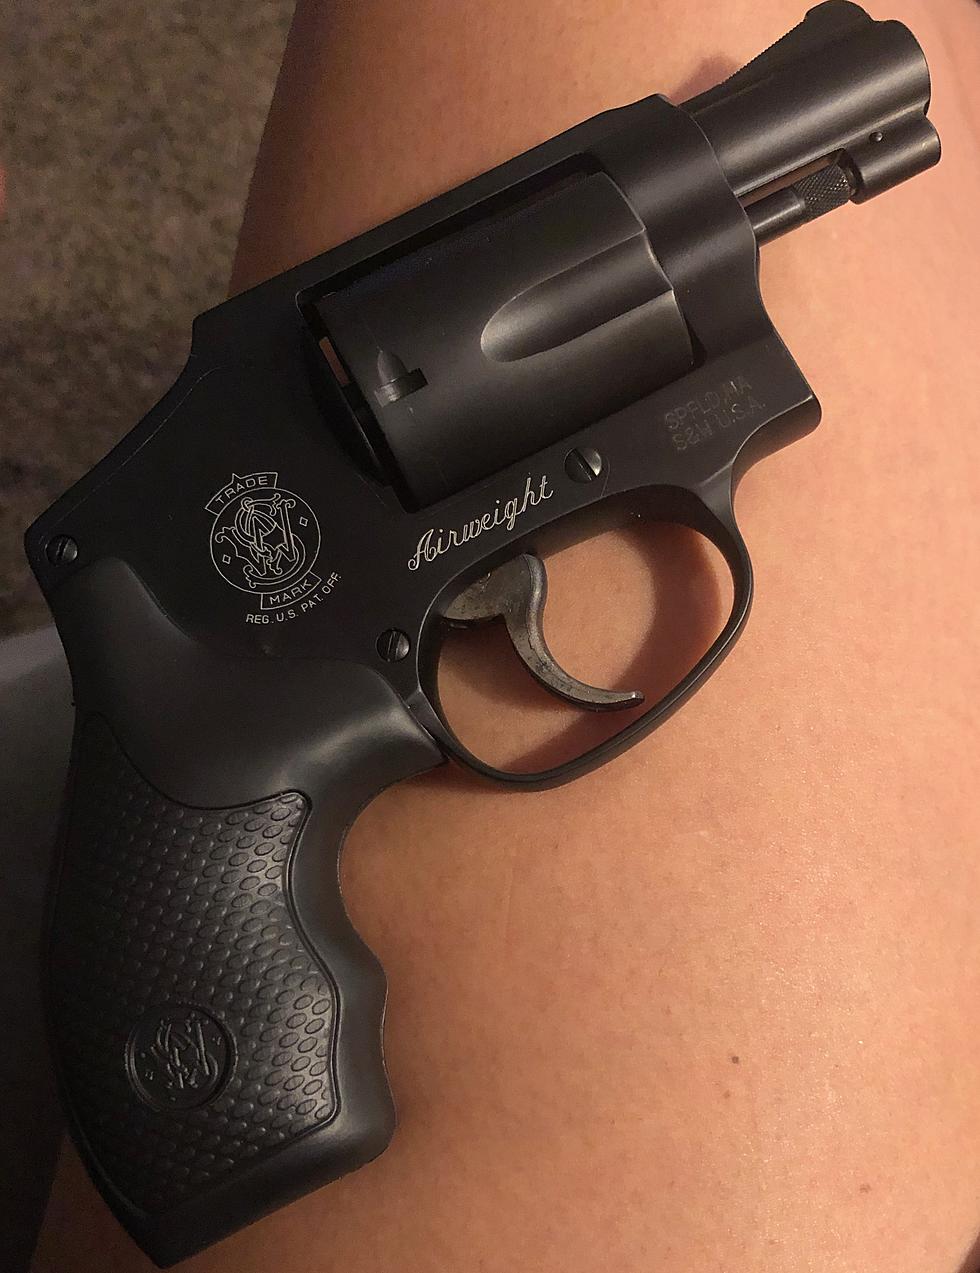 Keeta King Gets New Gun For Mother’s Day [PICTURE]